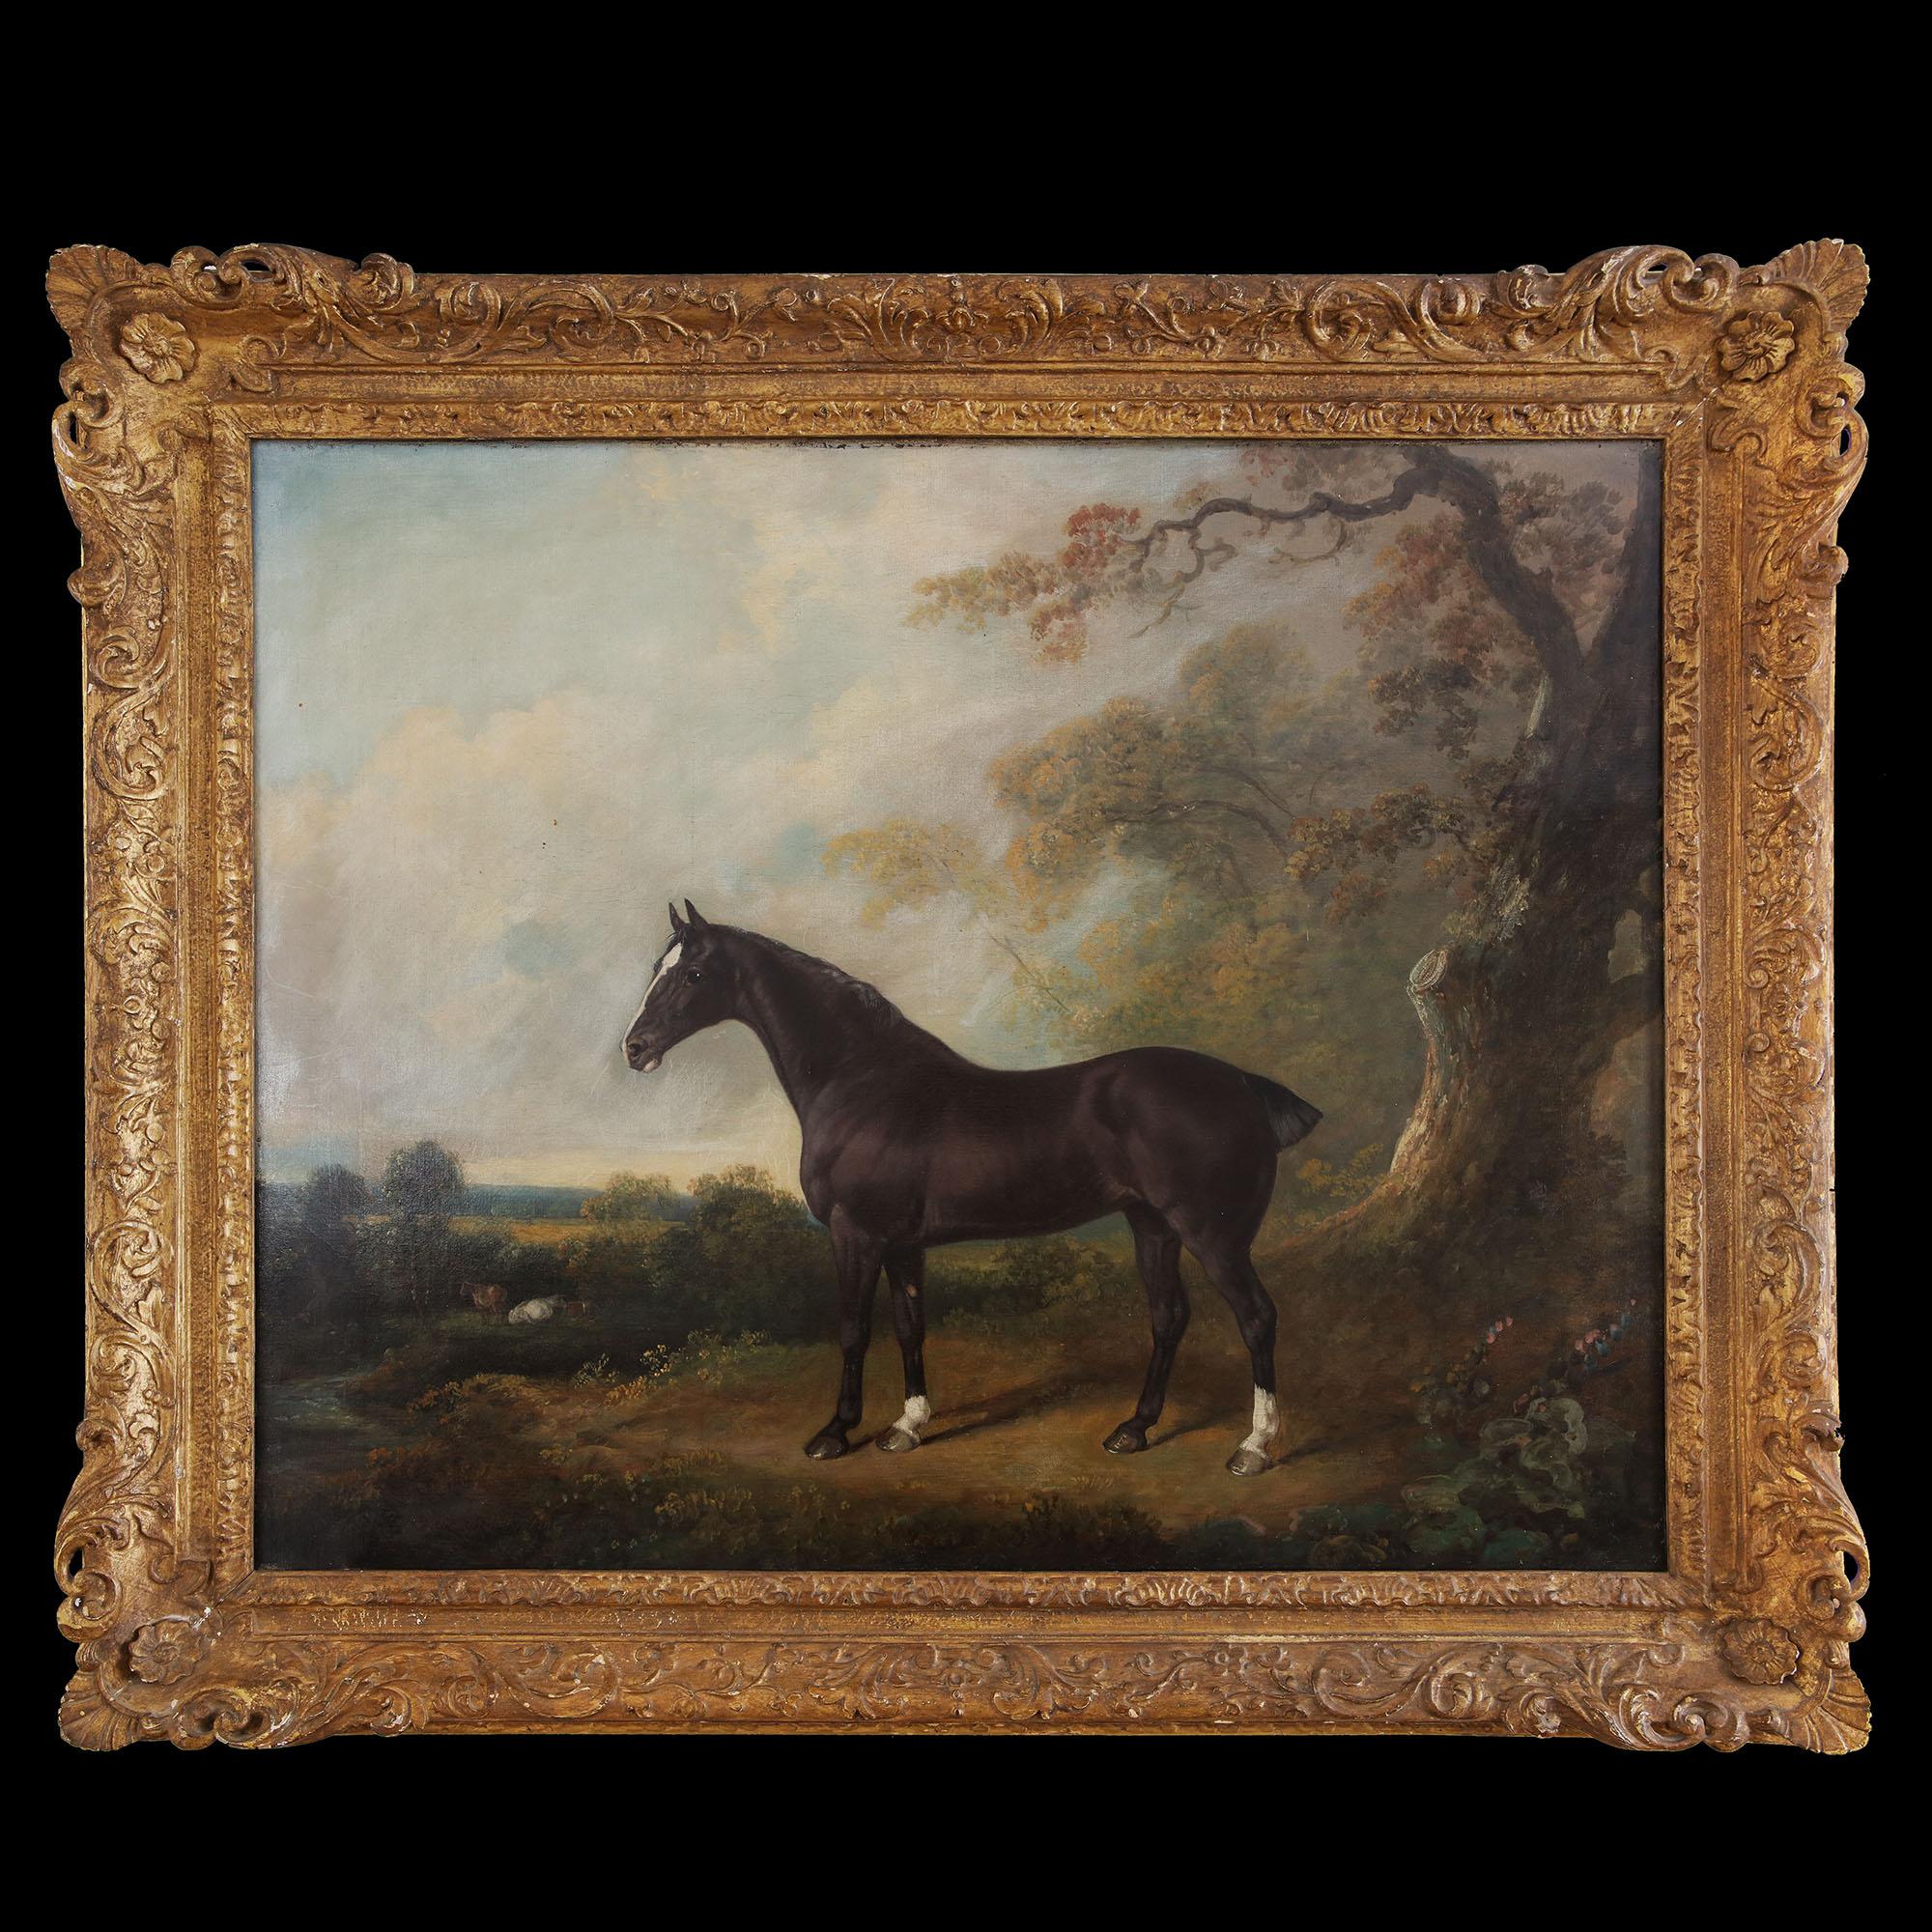 Fine Art, Charles Henry Scwanfelder (1774-1837). Signed C H Schwanfelder Pinx and dated 1825.

An exceptional portrait of a horse standing proud in woodland, in front of a tree-lined vista incorporating cows residing by a stream.

Charles born in